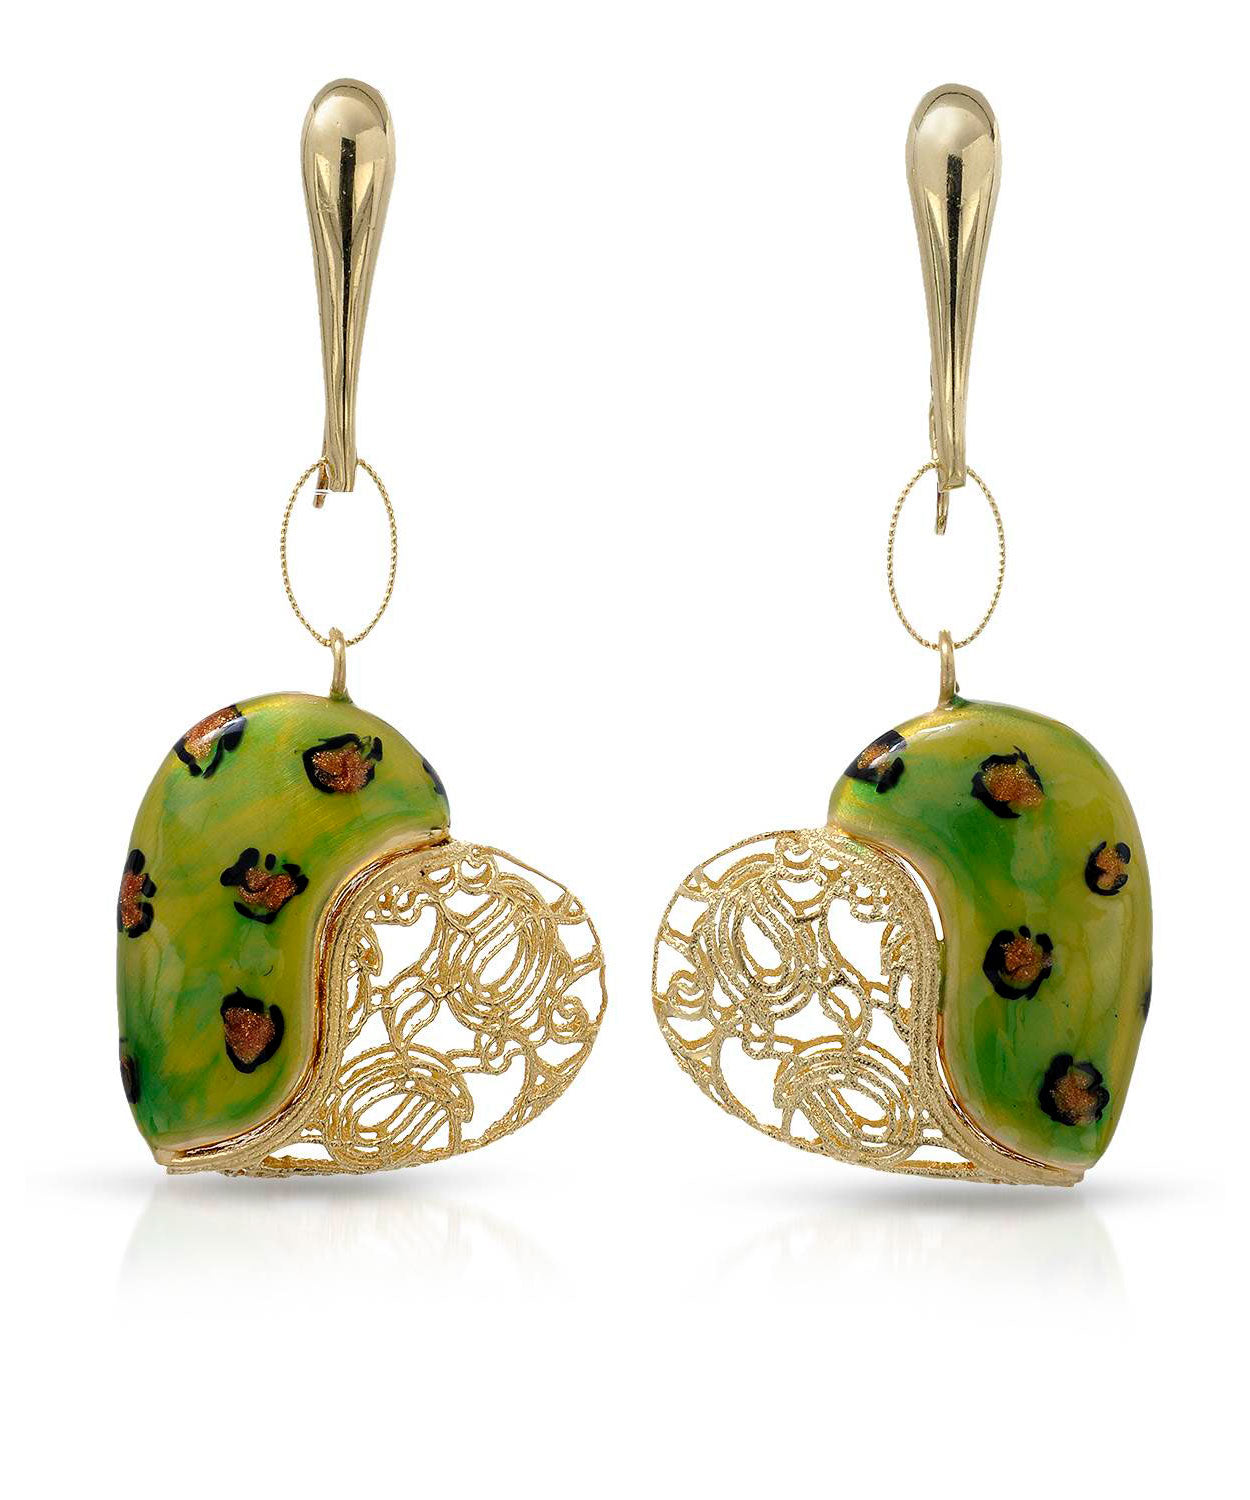 Patterns of Love Collection 14k Gold & Enamel Heart Dangle Earrings - Made in Italy View 1